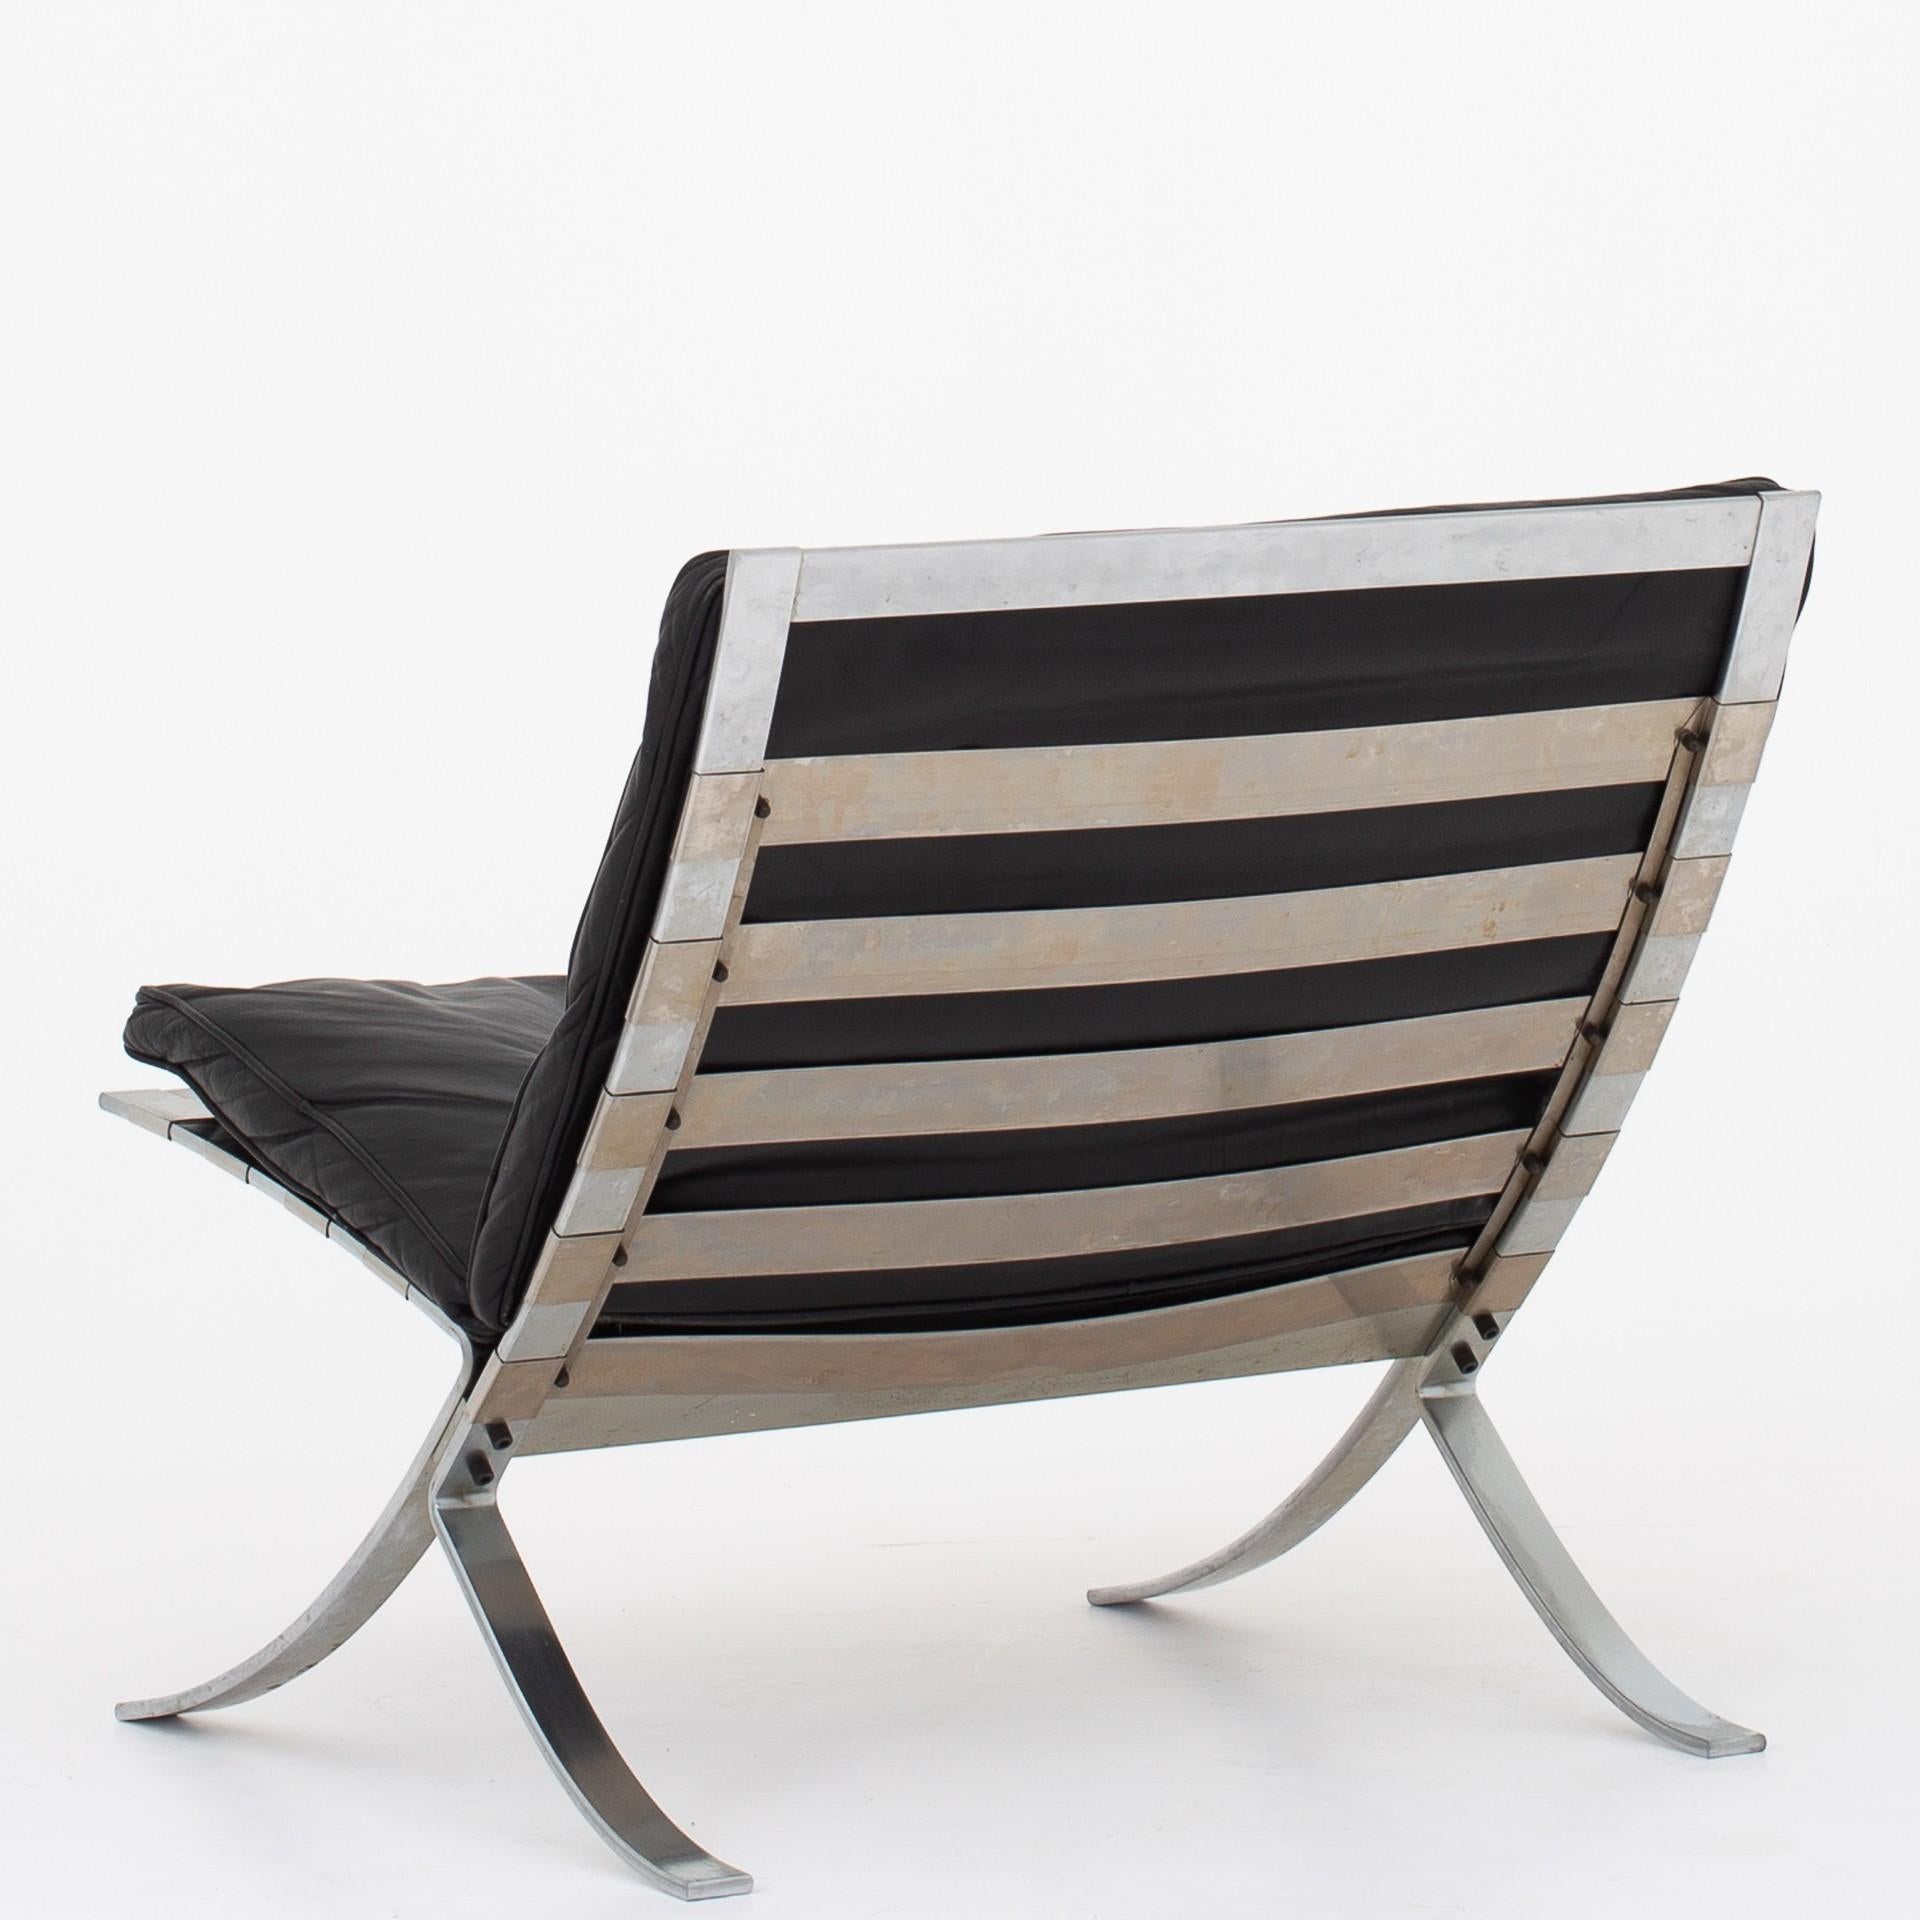 Tango easy chair in original, black leather and frame of steel. Maker Terrex Art. Designed 1968.